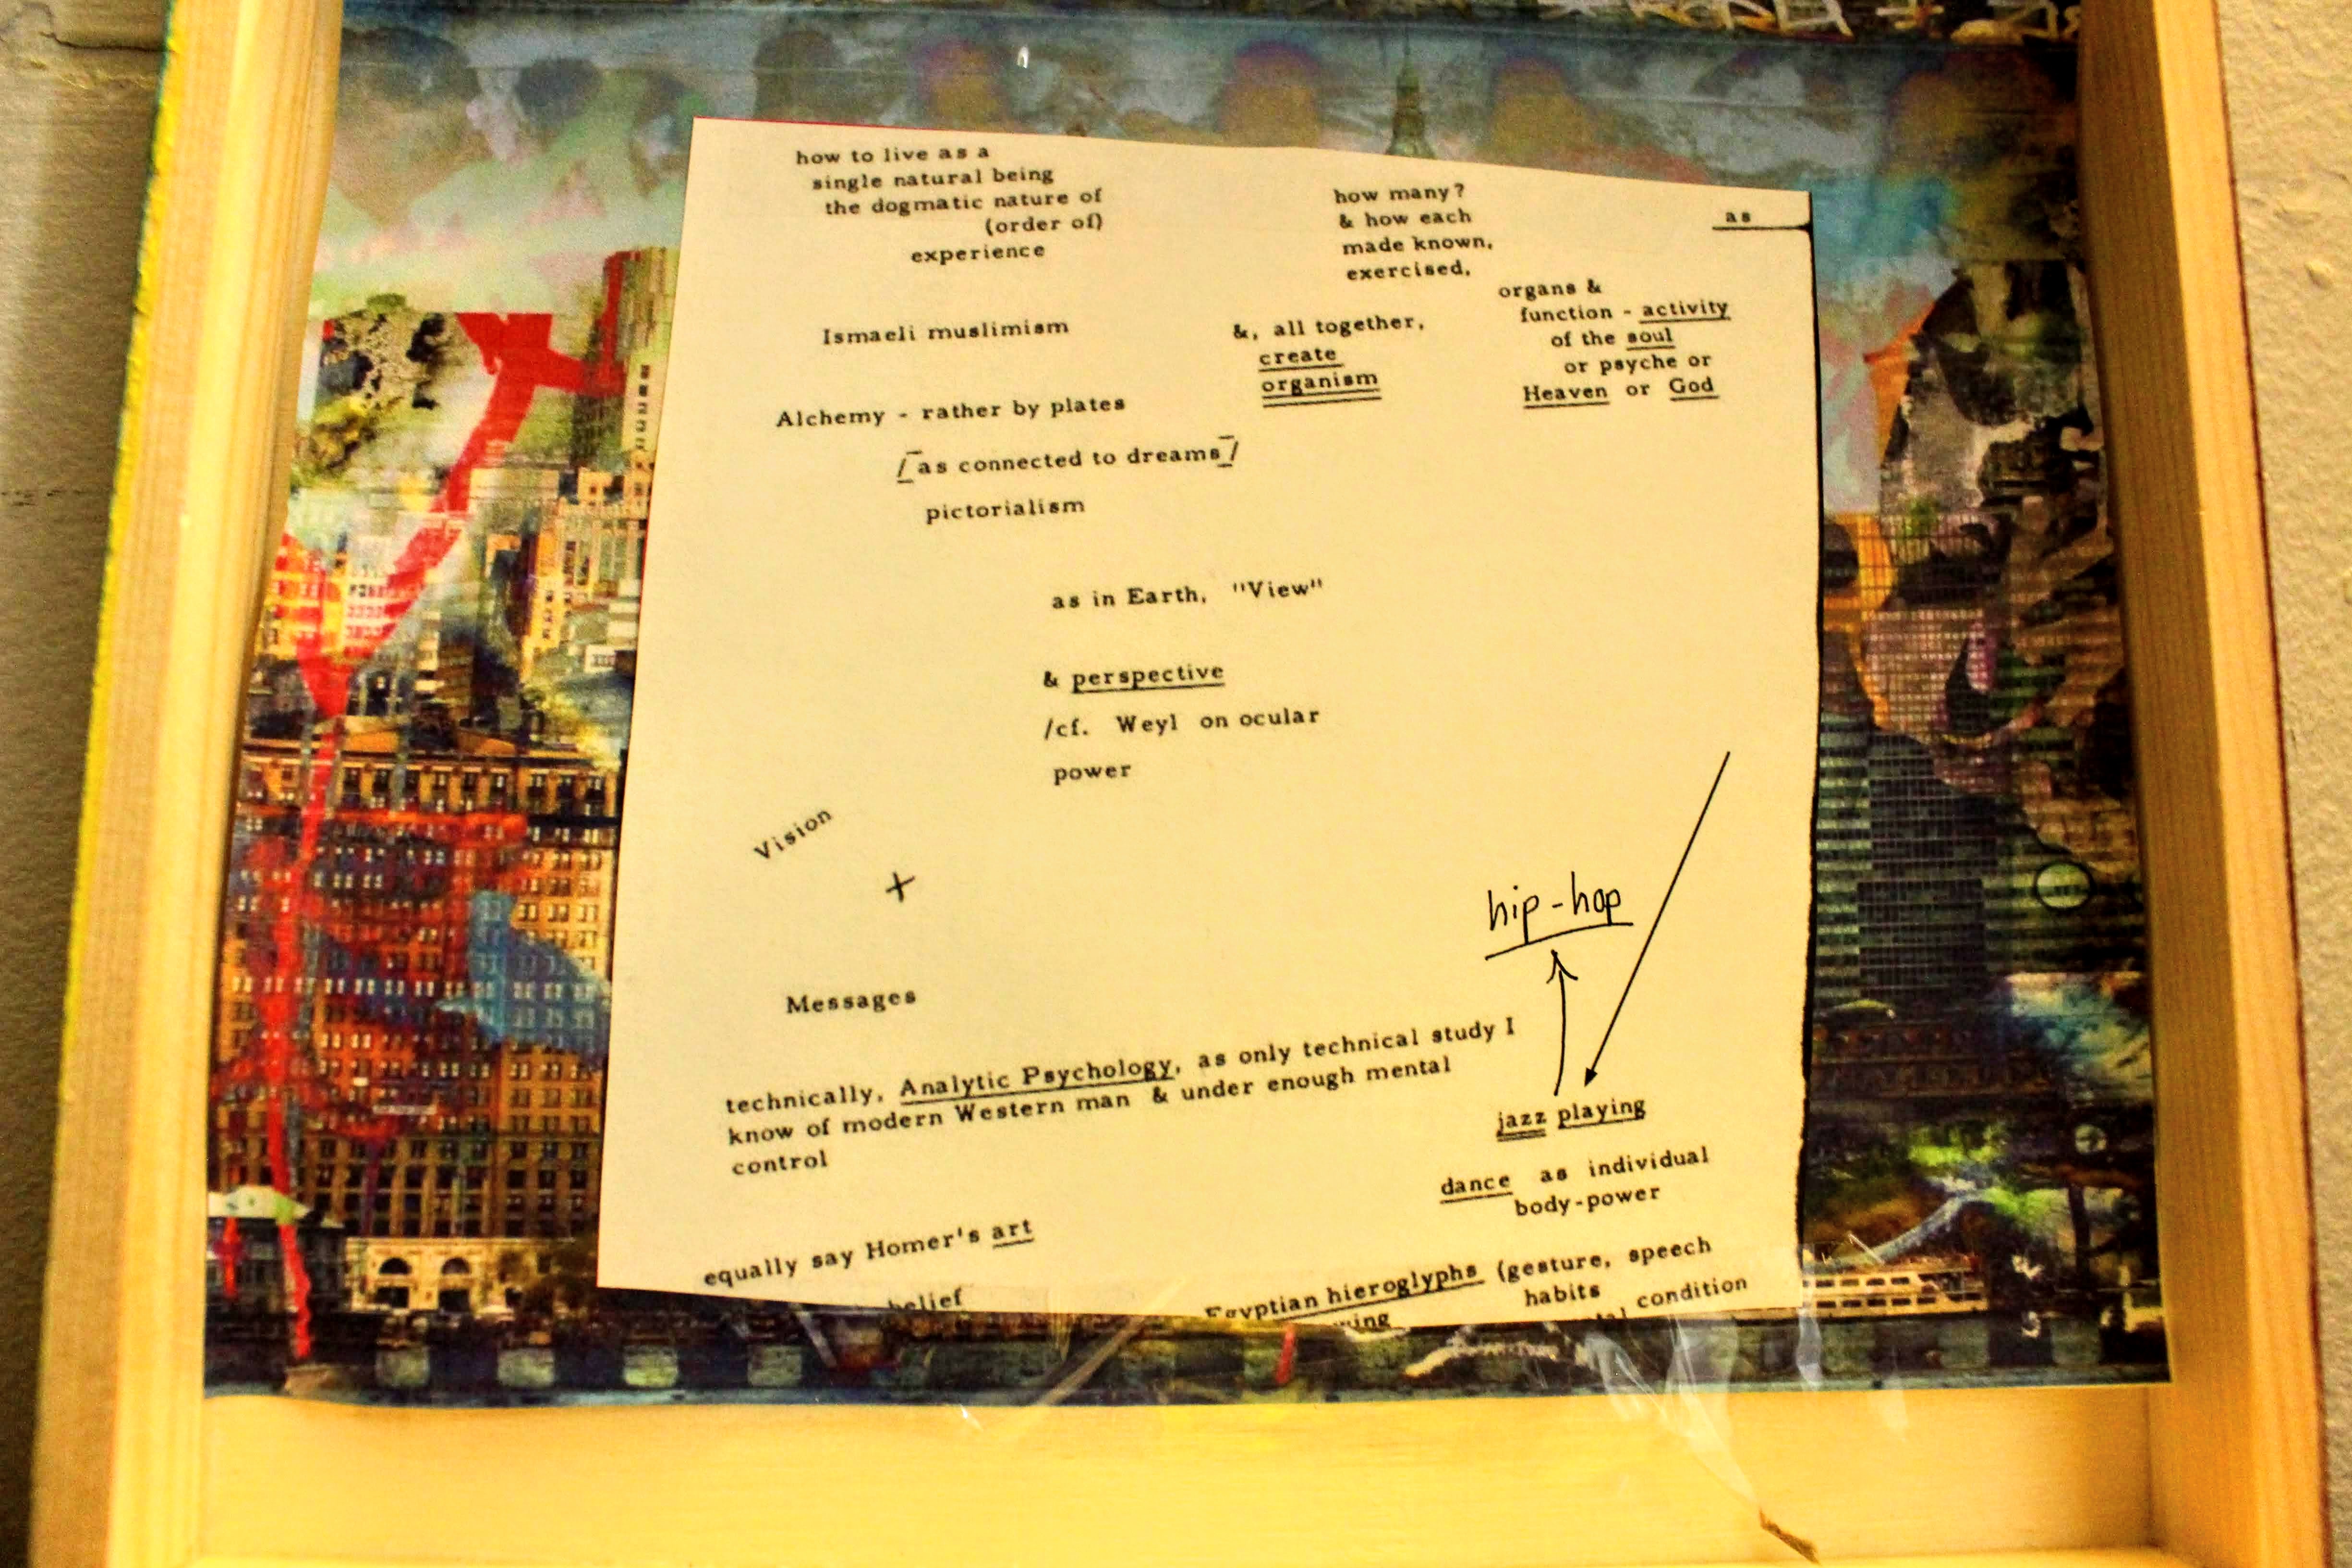 The upper part of the inside of the box. Includes a cutout of Prospero’s ‘Graffiti City’. Placed on top of the cutout is the a piece of Charles Olson’s “A Plan for the Curriculum of the Soul”. Here, I drew an arrow pointing away from the term ‘jazz playing’ and wrote the term ‘hip-hop’ with a pigment liner.